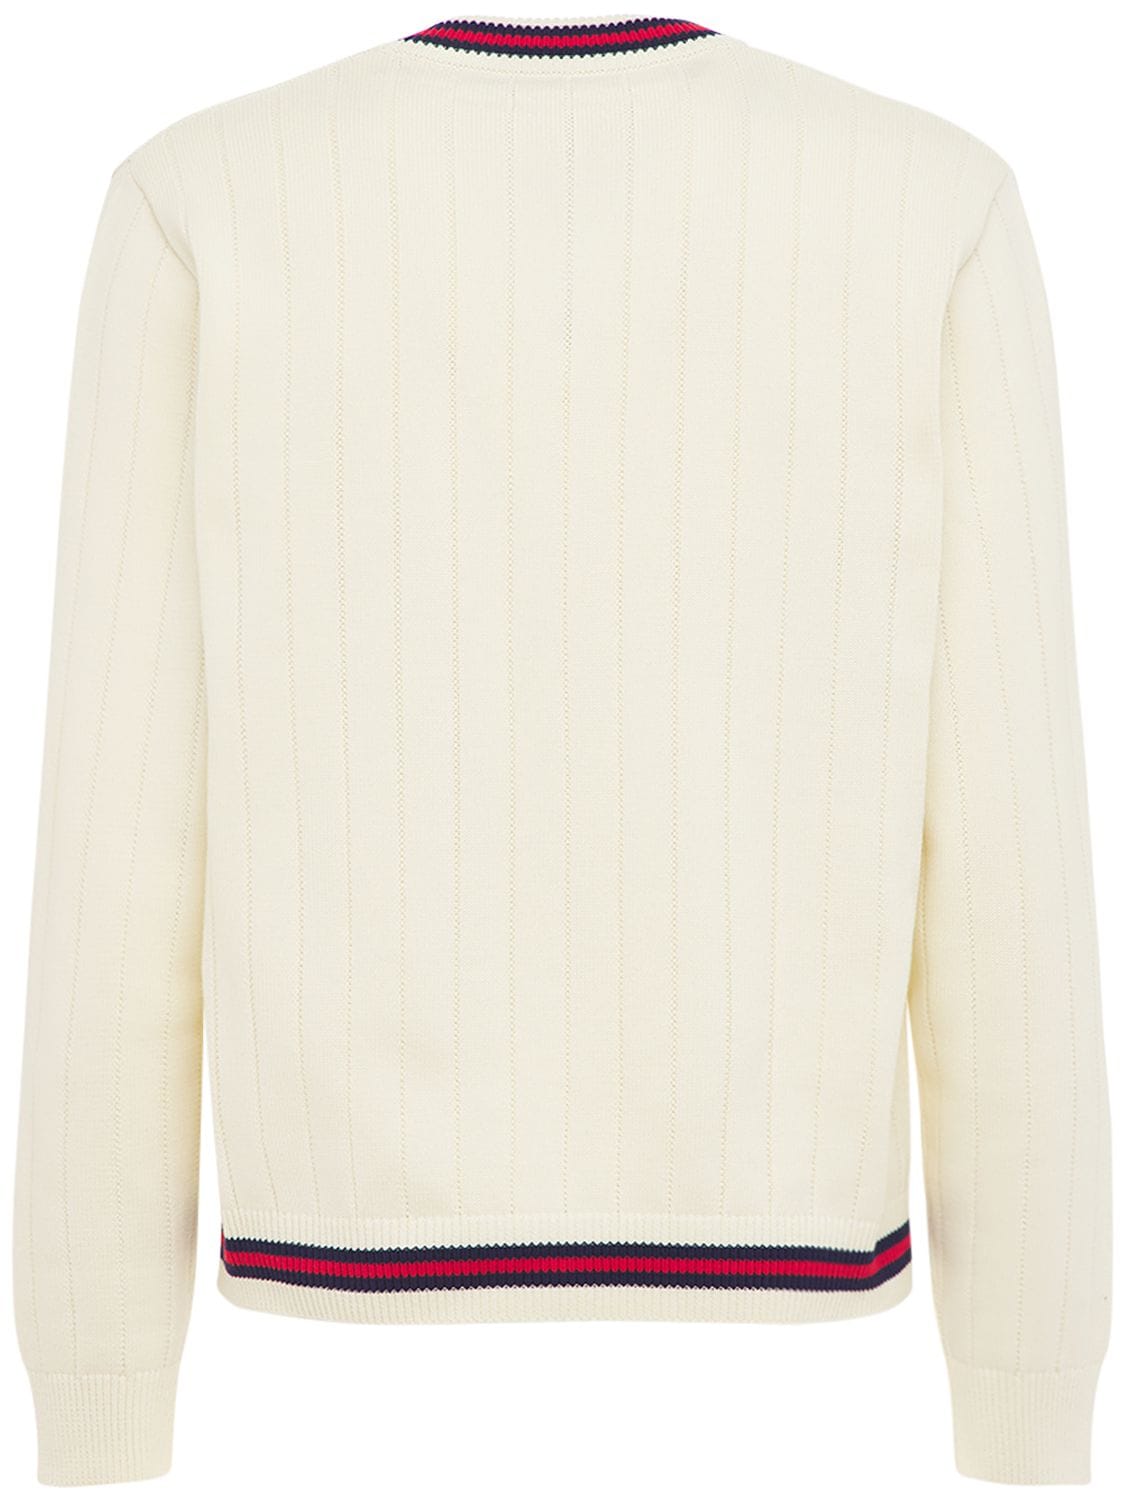 Shop Gucci Cotton Knit V Neck Sweater W/ Web In Ivory